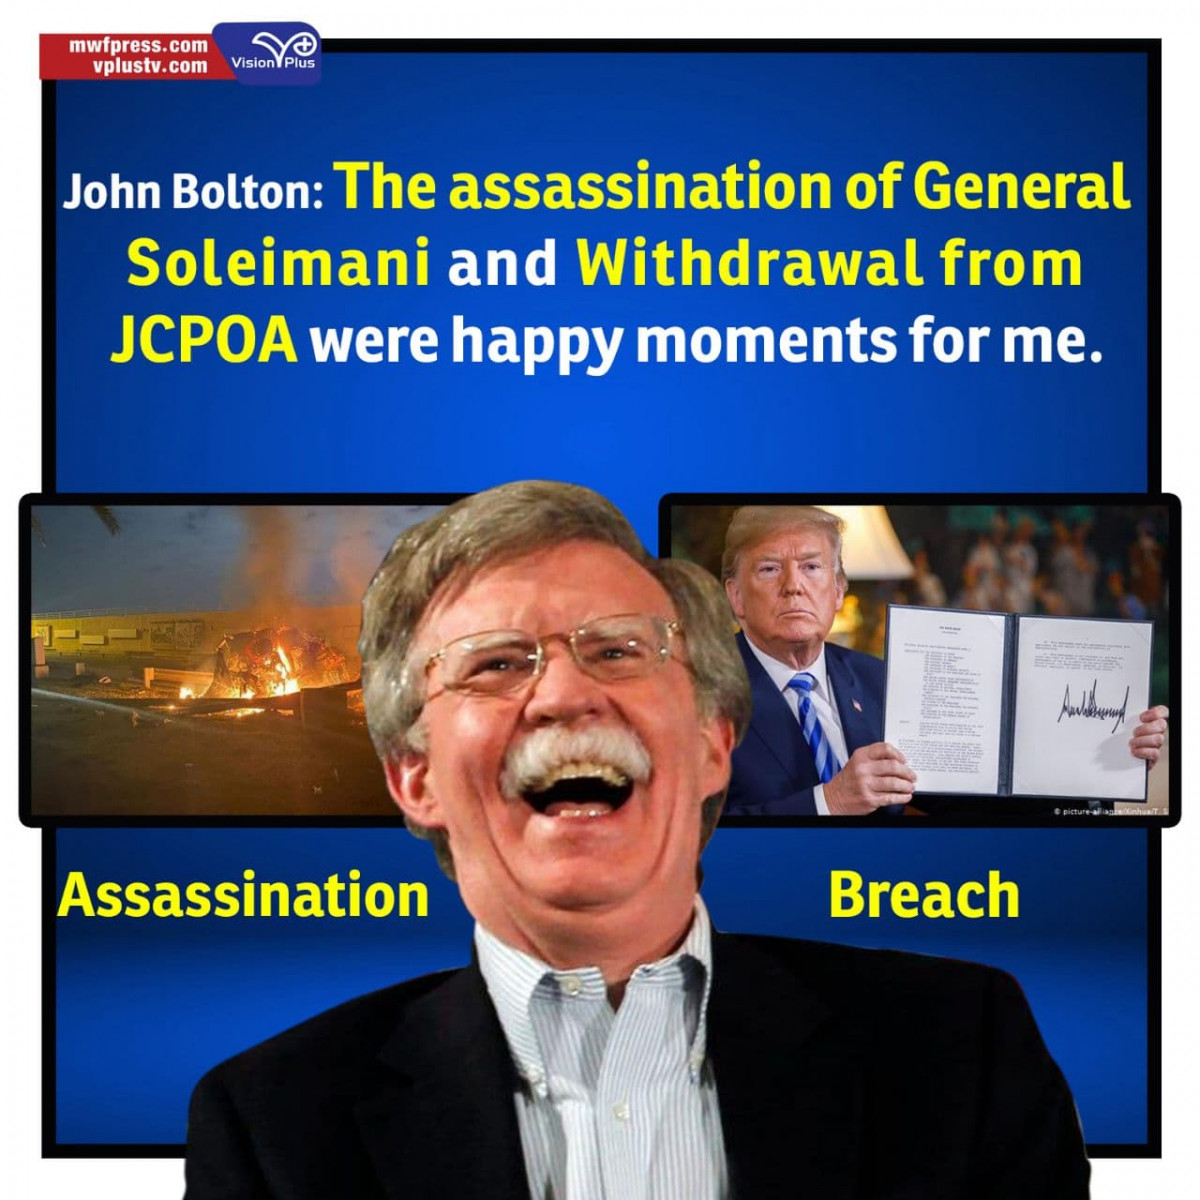 John Bolton: The assassination of General Soleimani and Withdrawal from JCPOA were happy moments for me